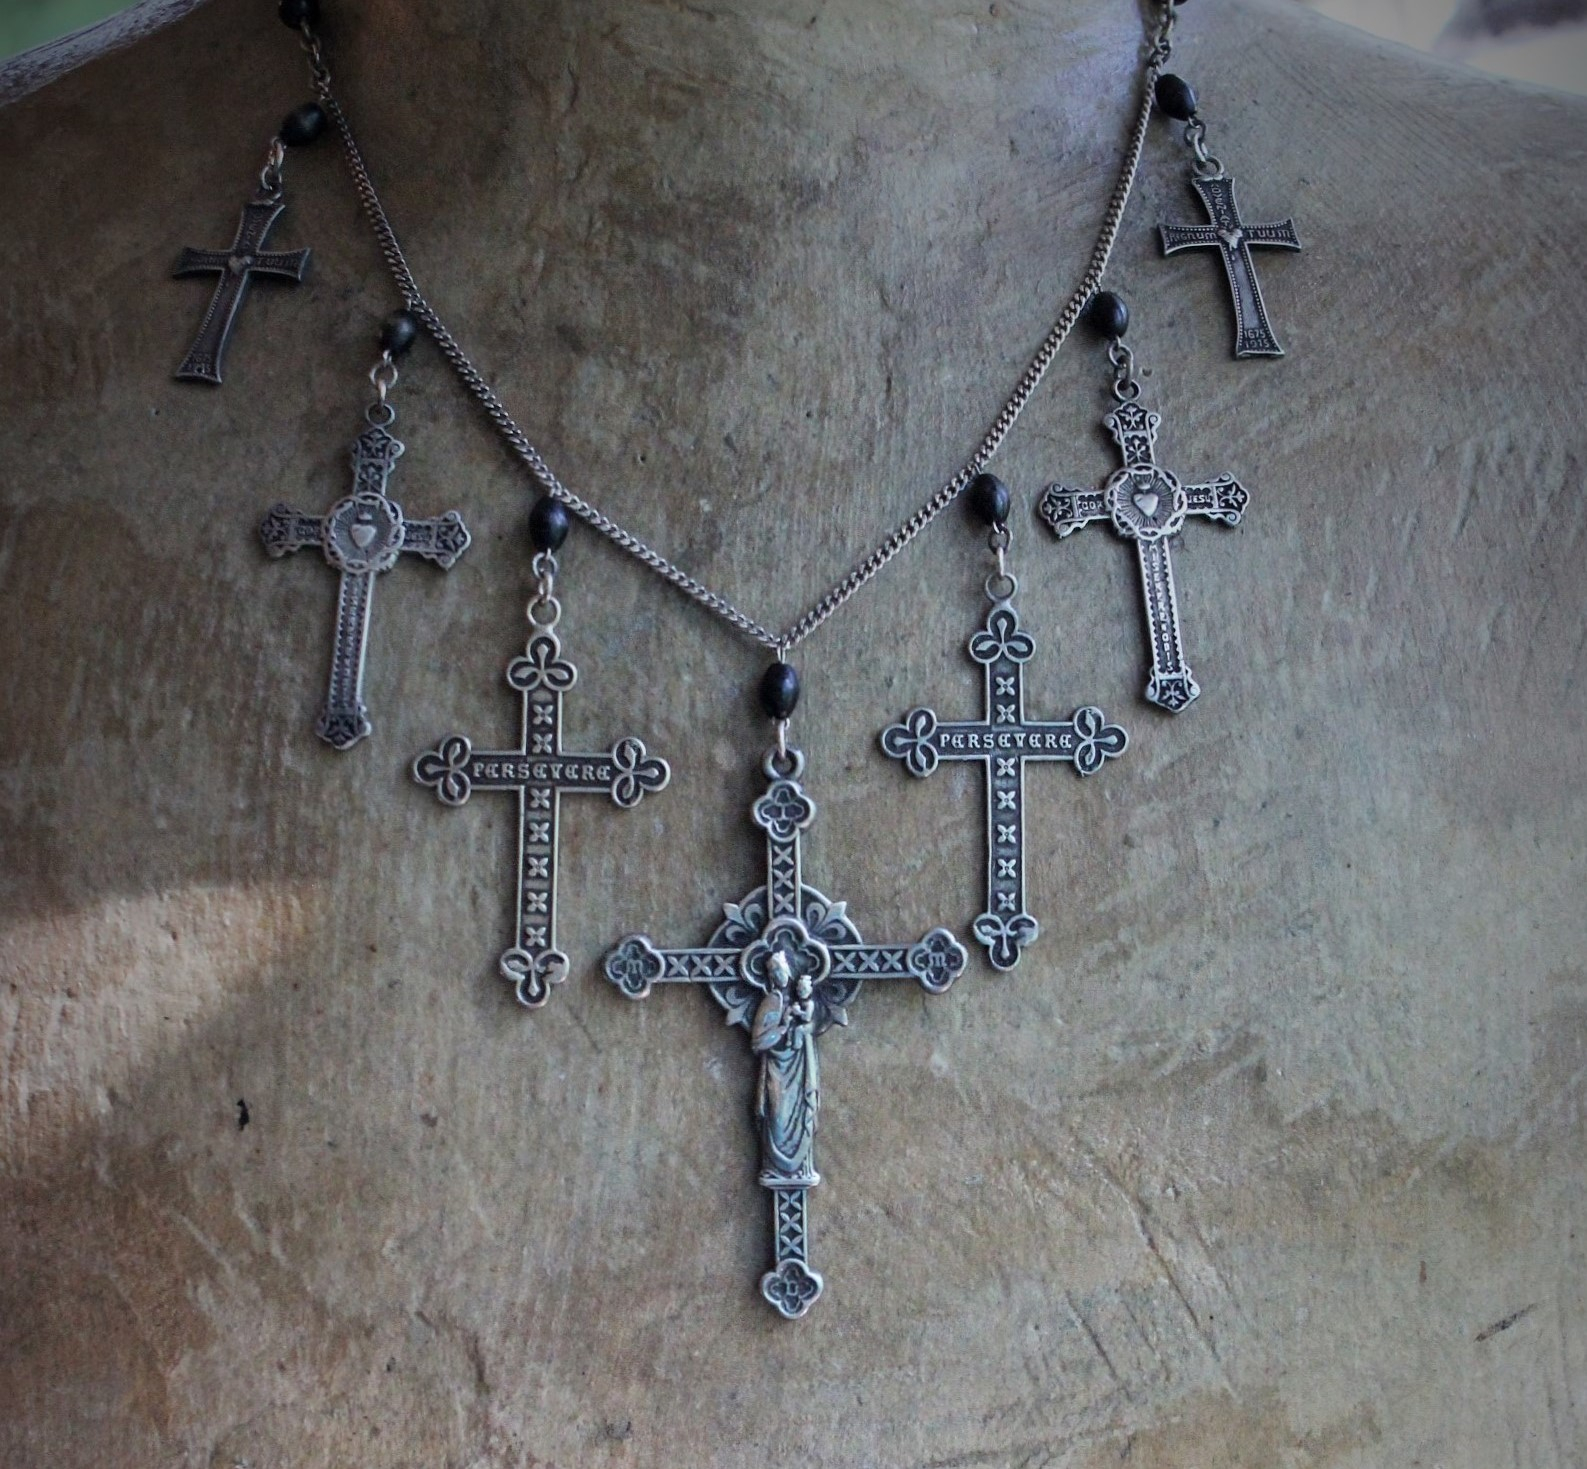 NEW! To Pray Necklace with 7 French Crosses, Antique Rosary Bead Fragments, Silver Chain